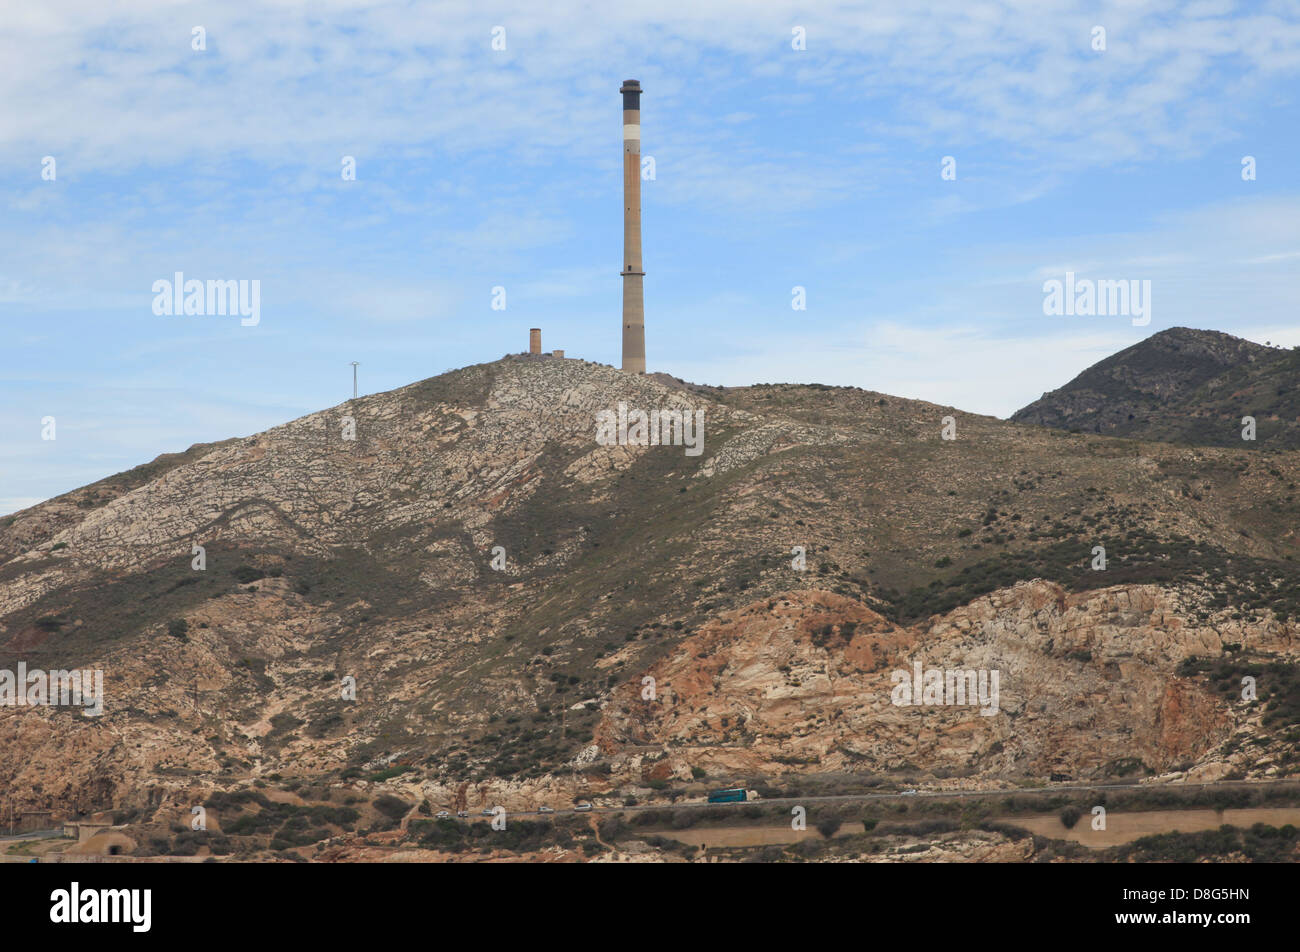 Large Smoke stack on a mountain in Spain Stock Photo